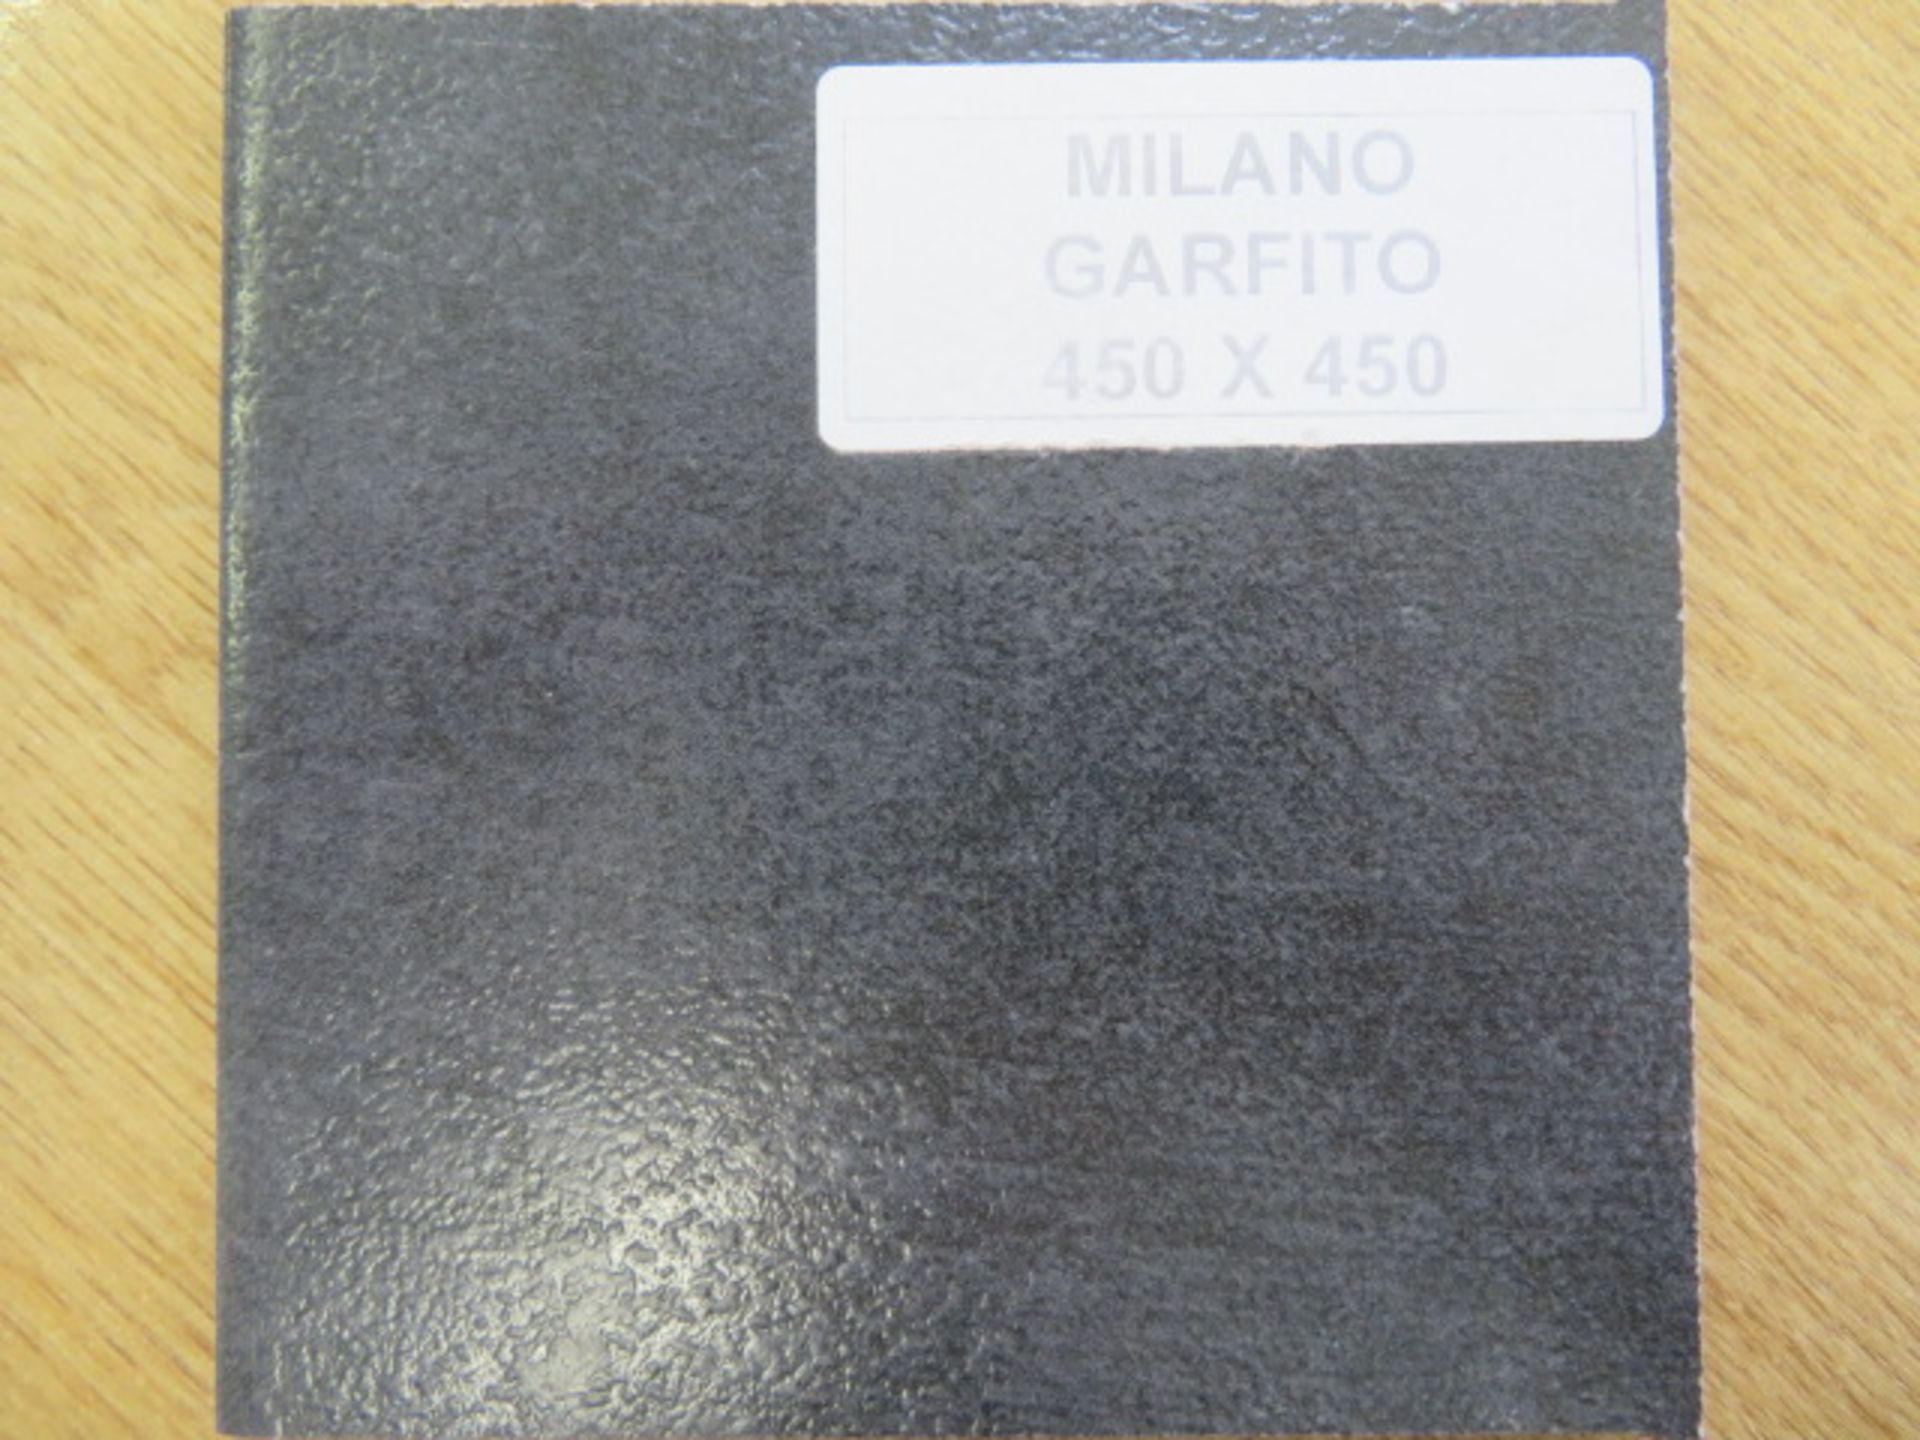 NEW 20.8M2 Square Meters of Milano Garfito Wall and Floor Tiles. 450x450mm per tile, 10mm Thick. - Image 2 of 2